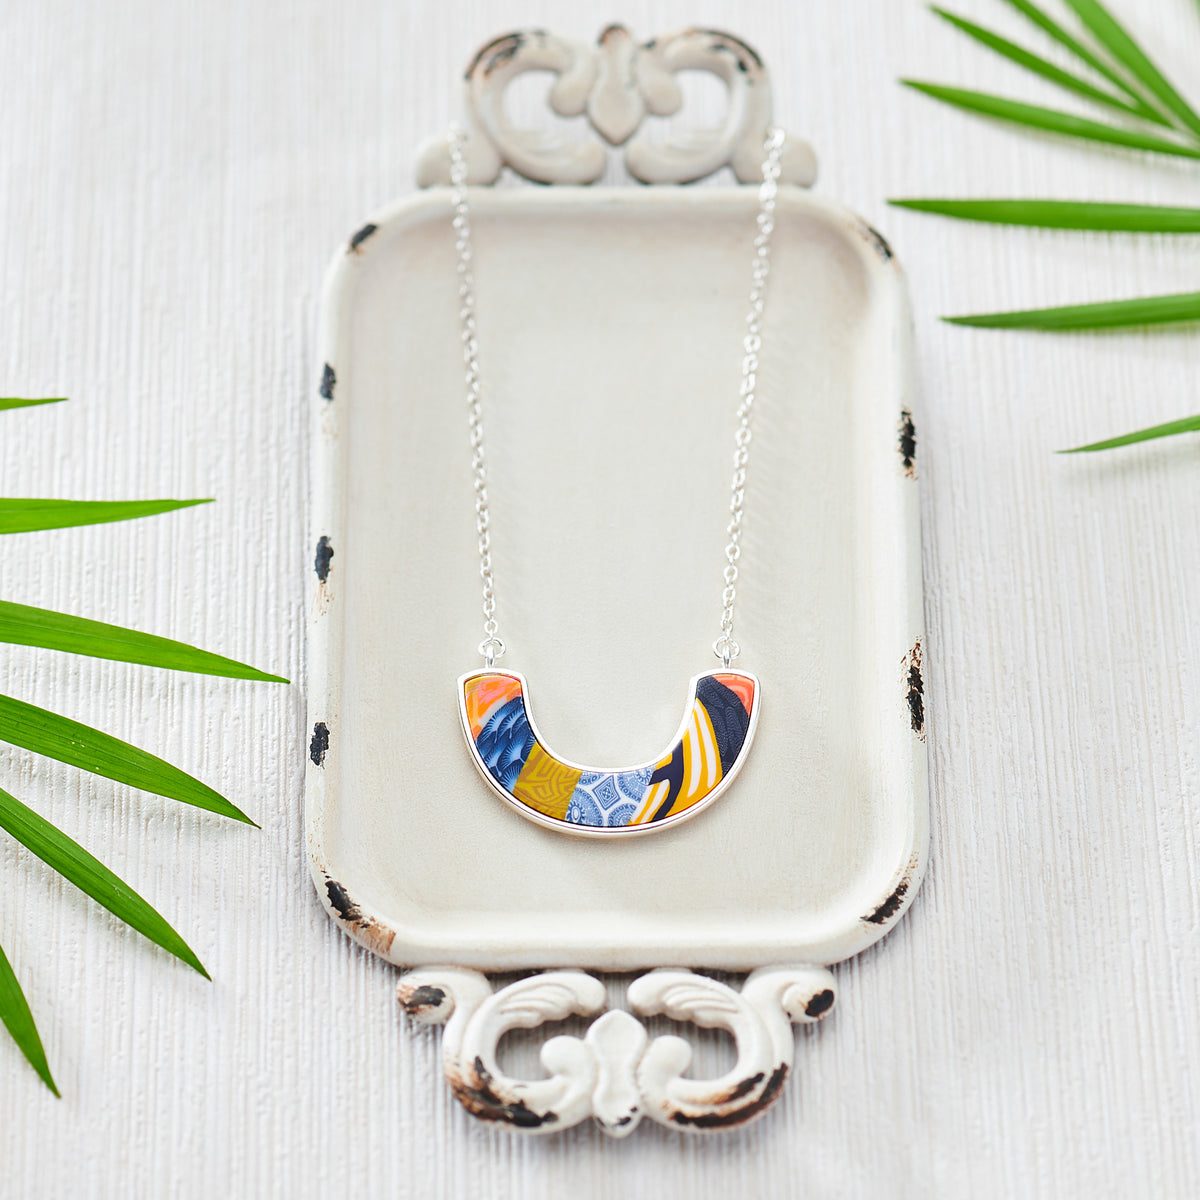 French Quarter Reversible Cradle Necklace